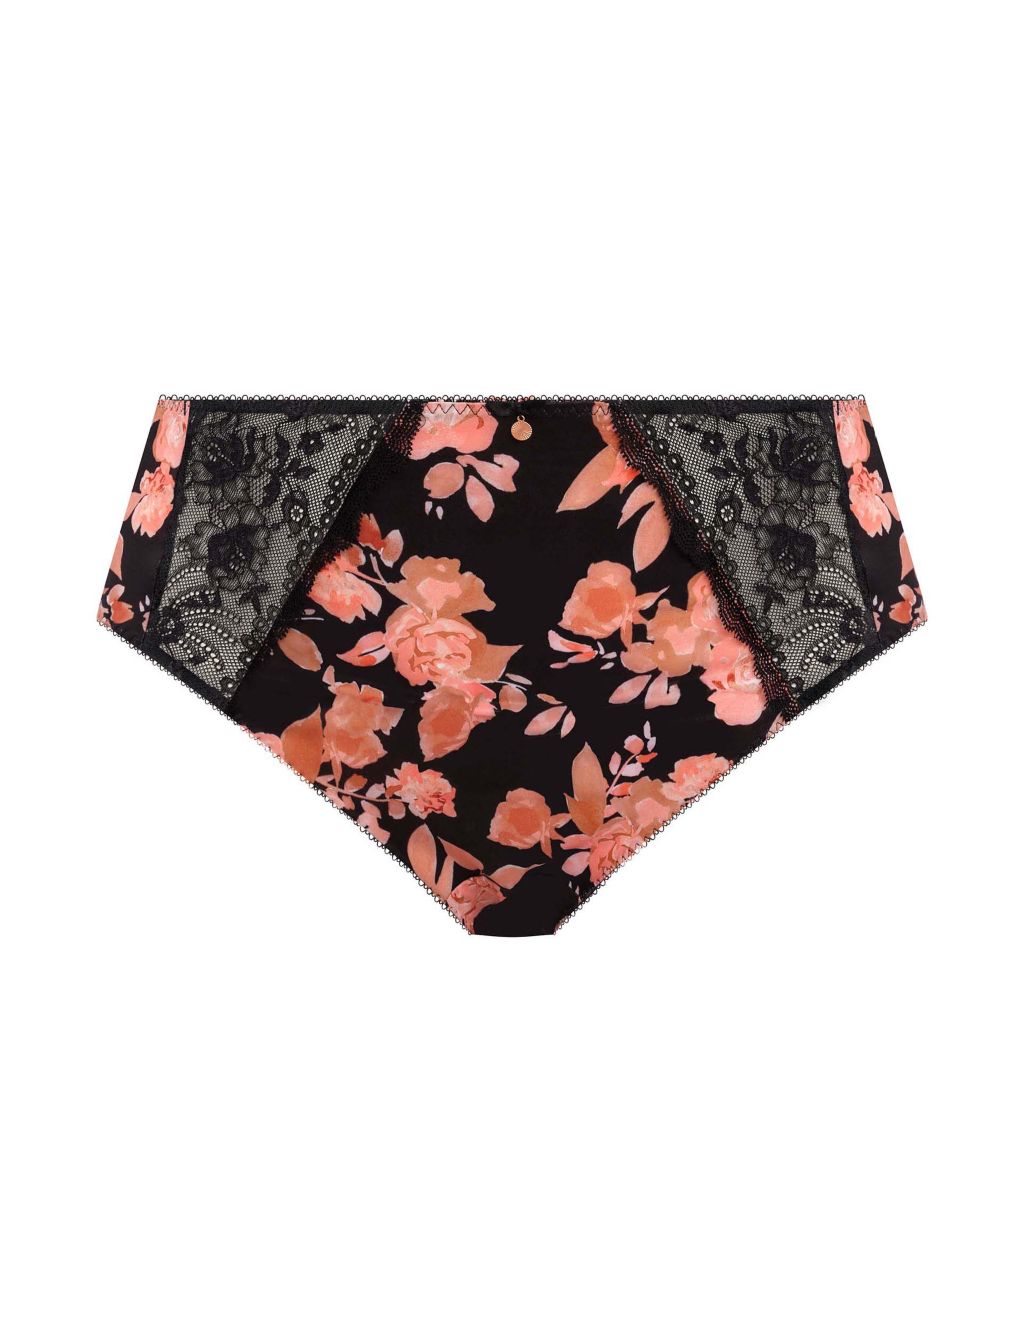 Morgan Floral Lace Full Briefs image 2